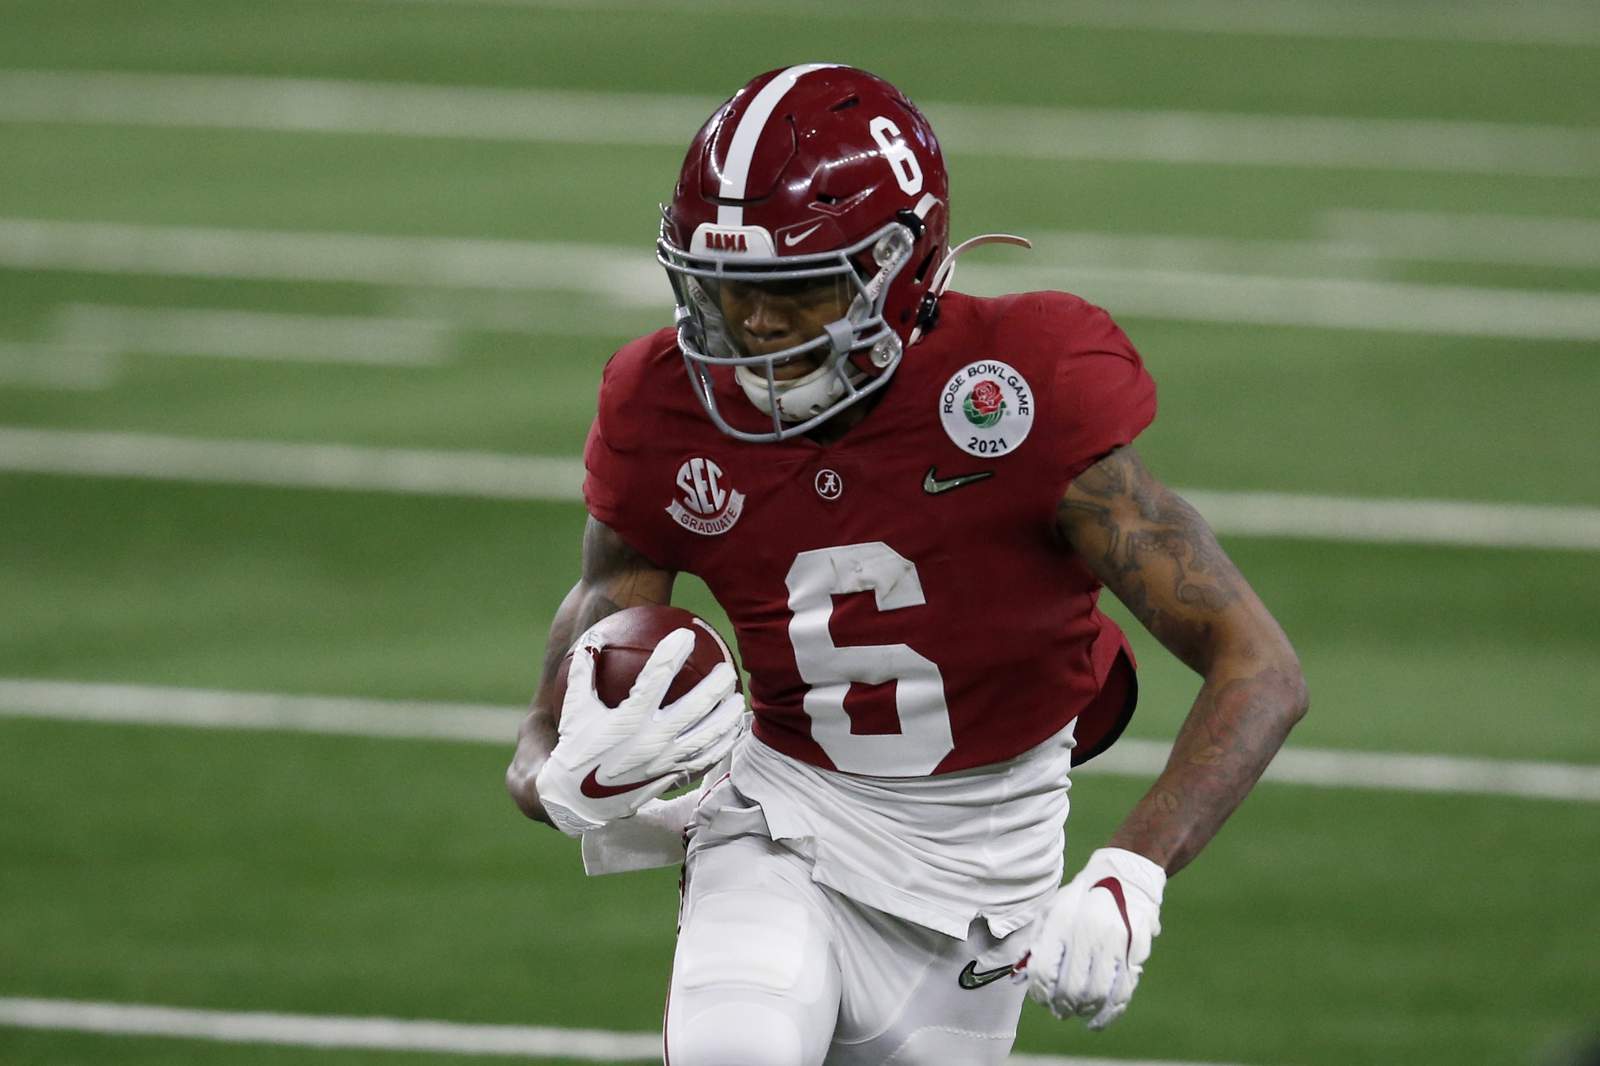 Alabama's Smith becomes 1st WR to win Heisman in 29 years